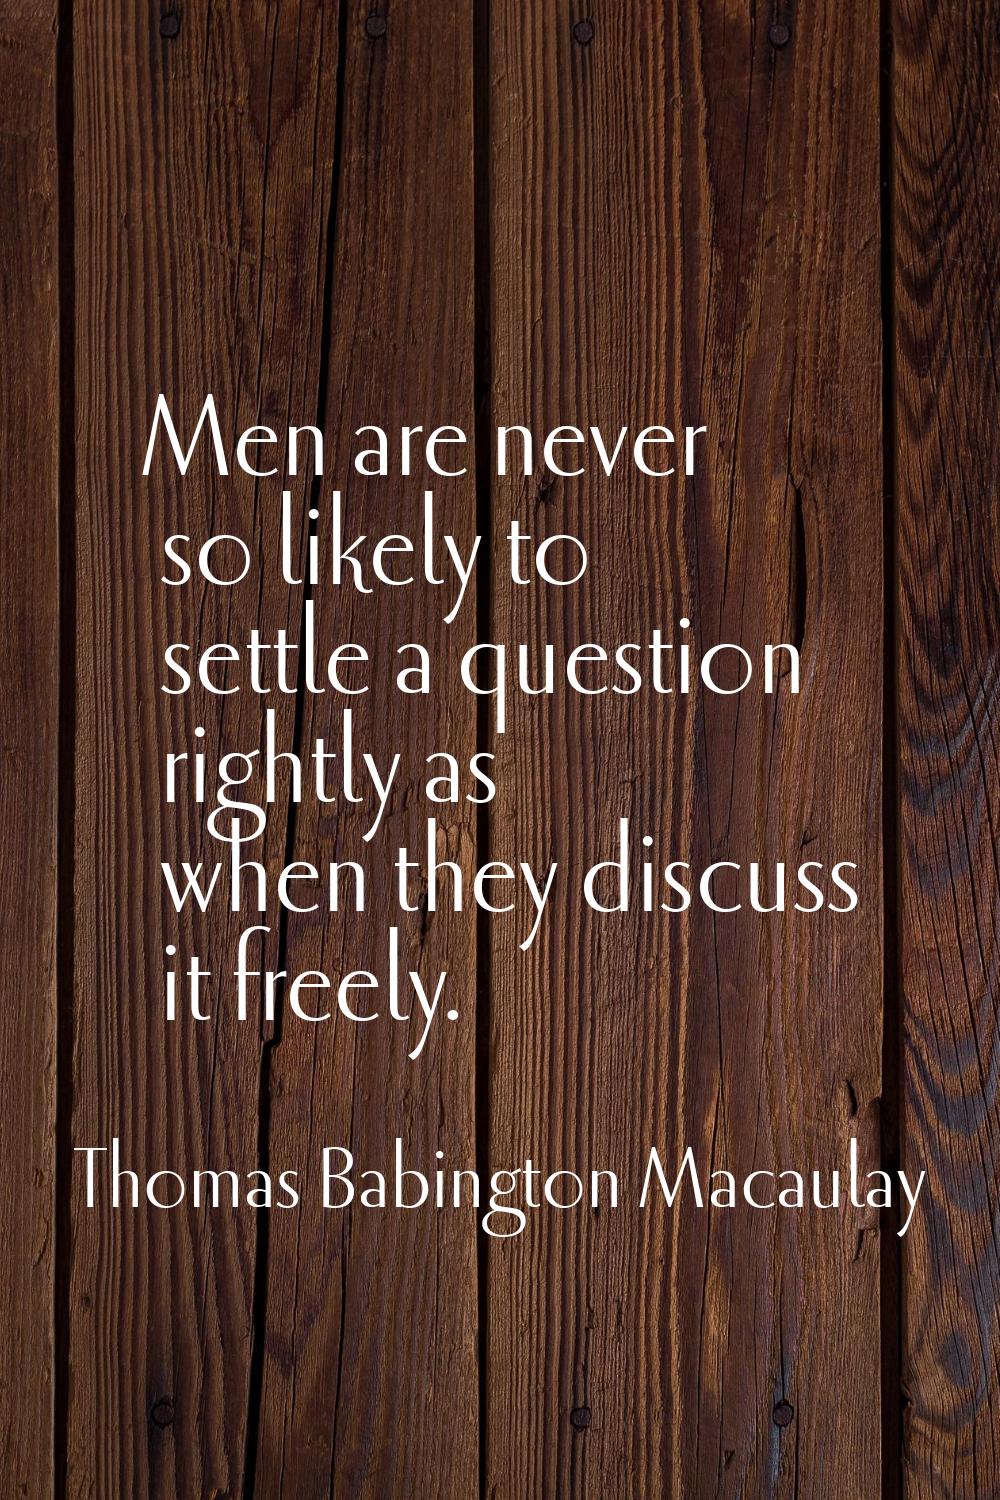 Men are never so likely to settle a question rightly as when they discuss it freely.